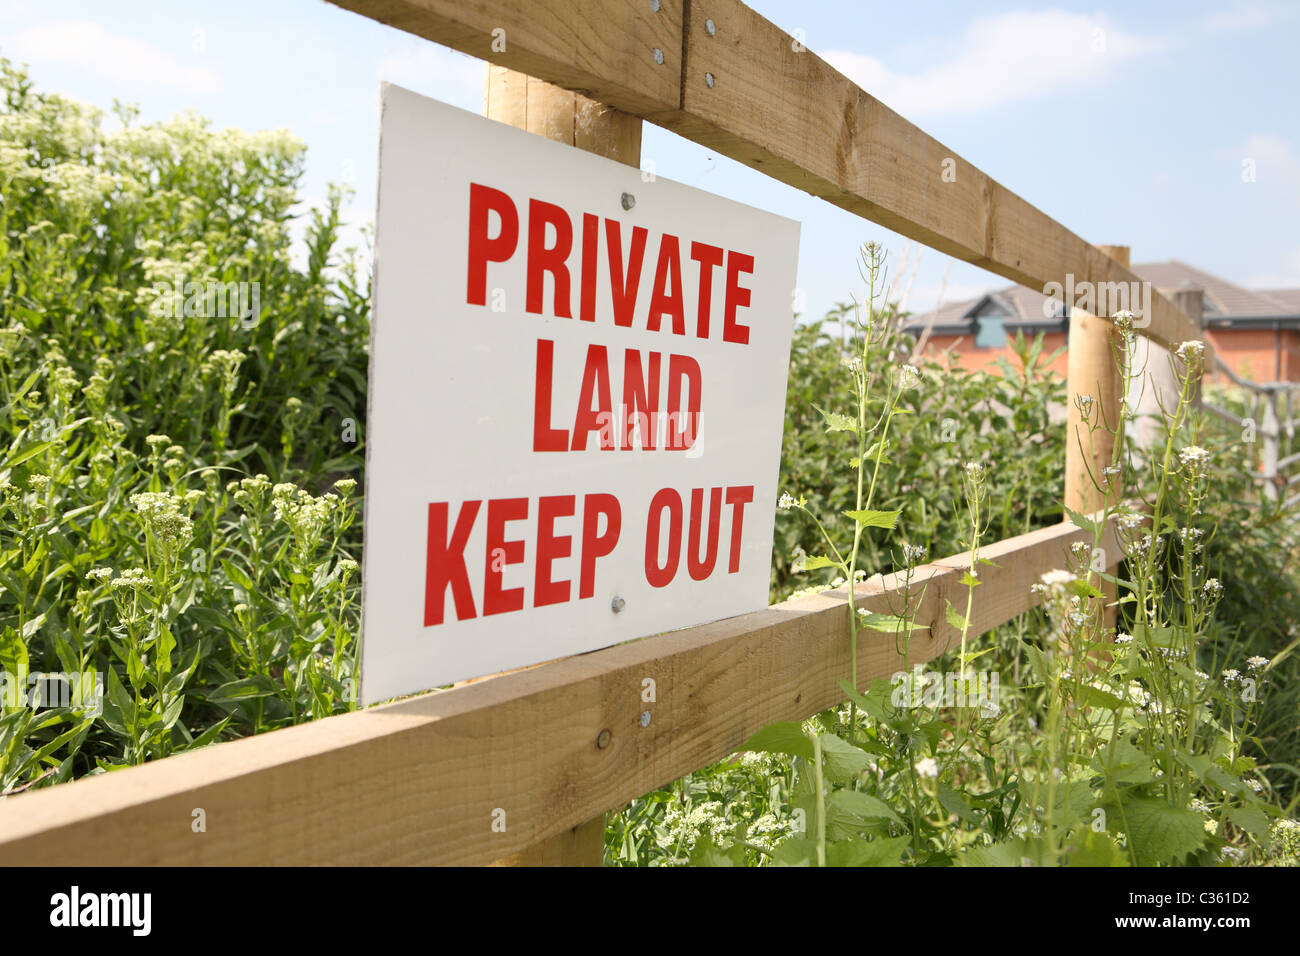 Private land keep out sign Stock Photo